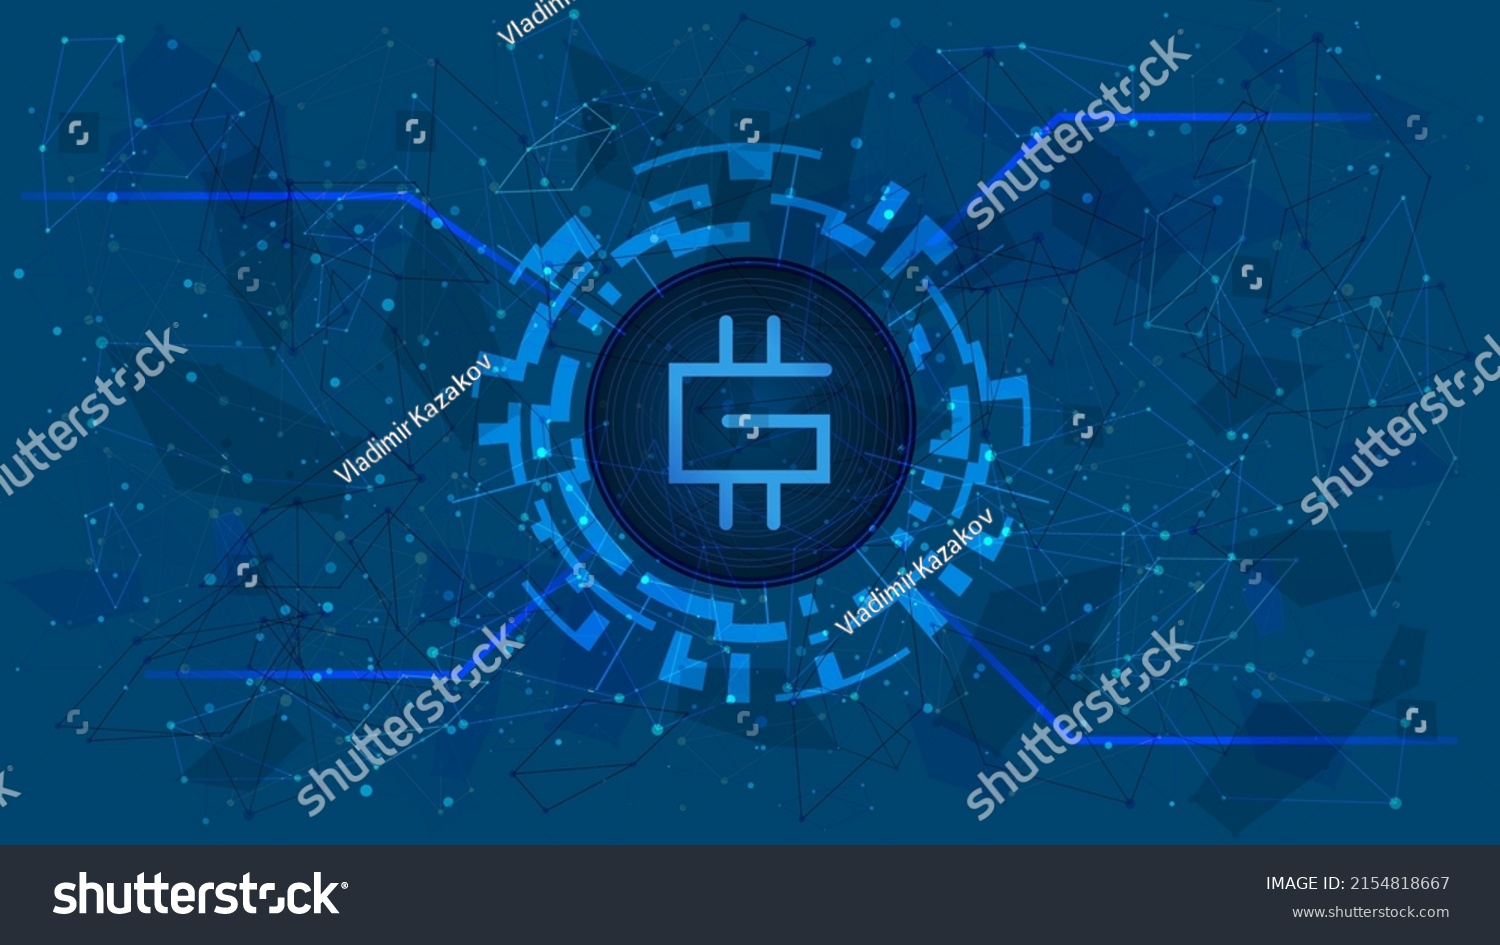 SVG of Stepn GMT token symbol in digital circle with futuristic cryptocurrency theme on blue background. Cryptocurrency coin icon for banner or news. Vector illustration. svg